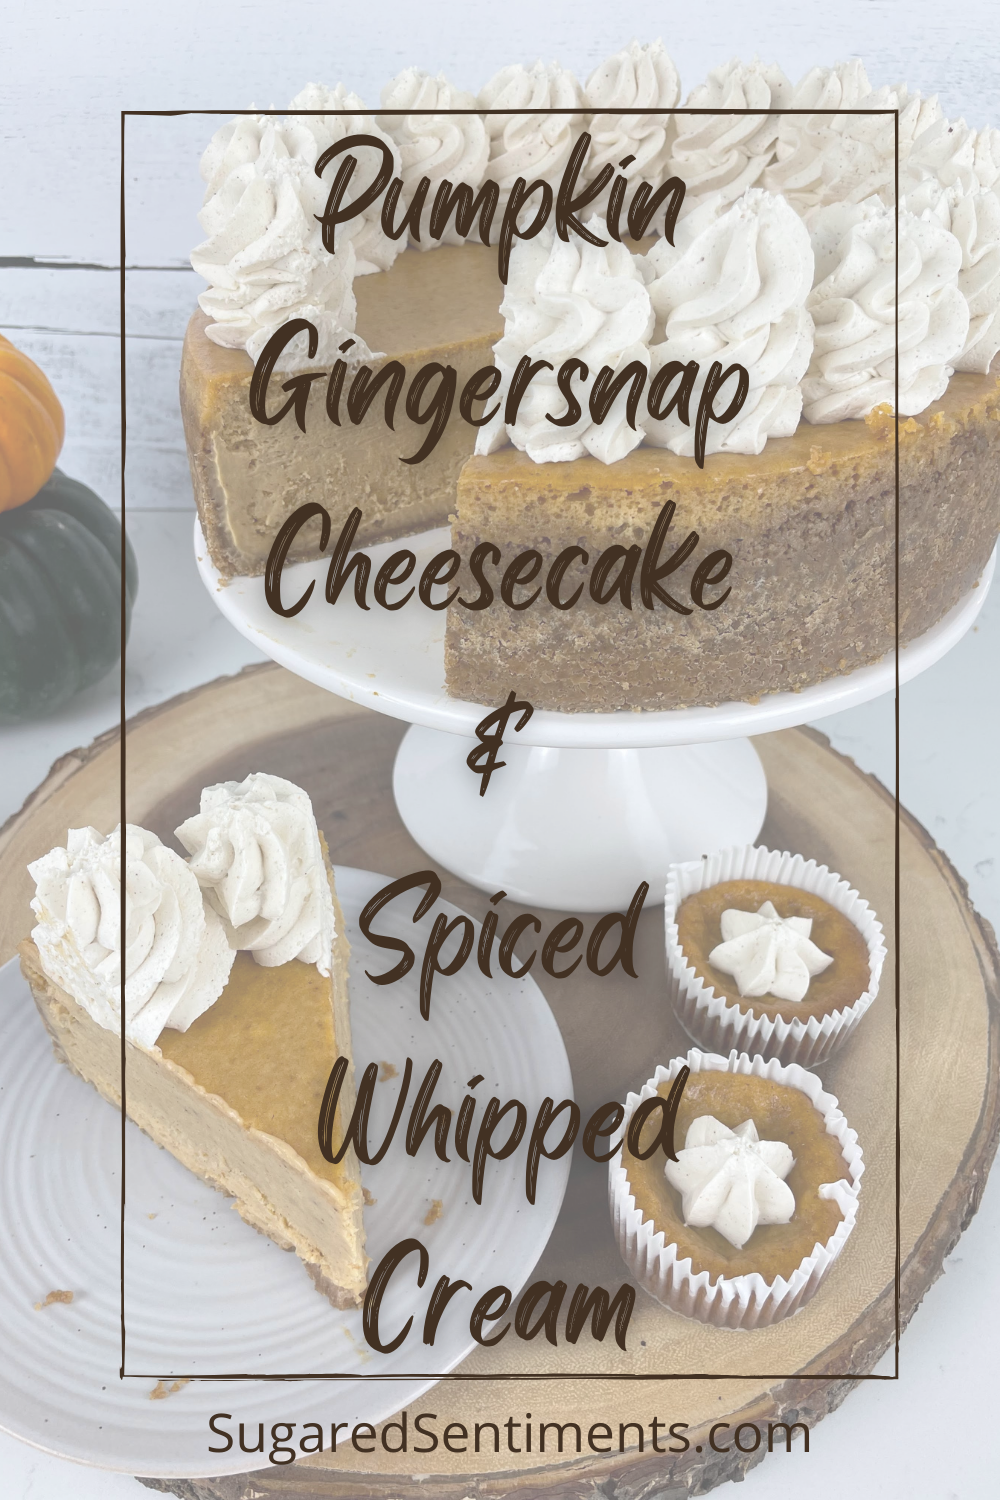 This BEST EVER Pumpkin Gingersnap Cheesecake & Spiced Whipped Cream is better than anything you can buy at a restaurant or store front!